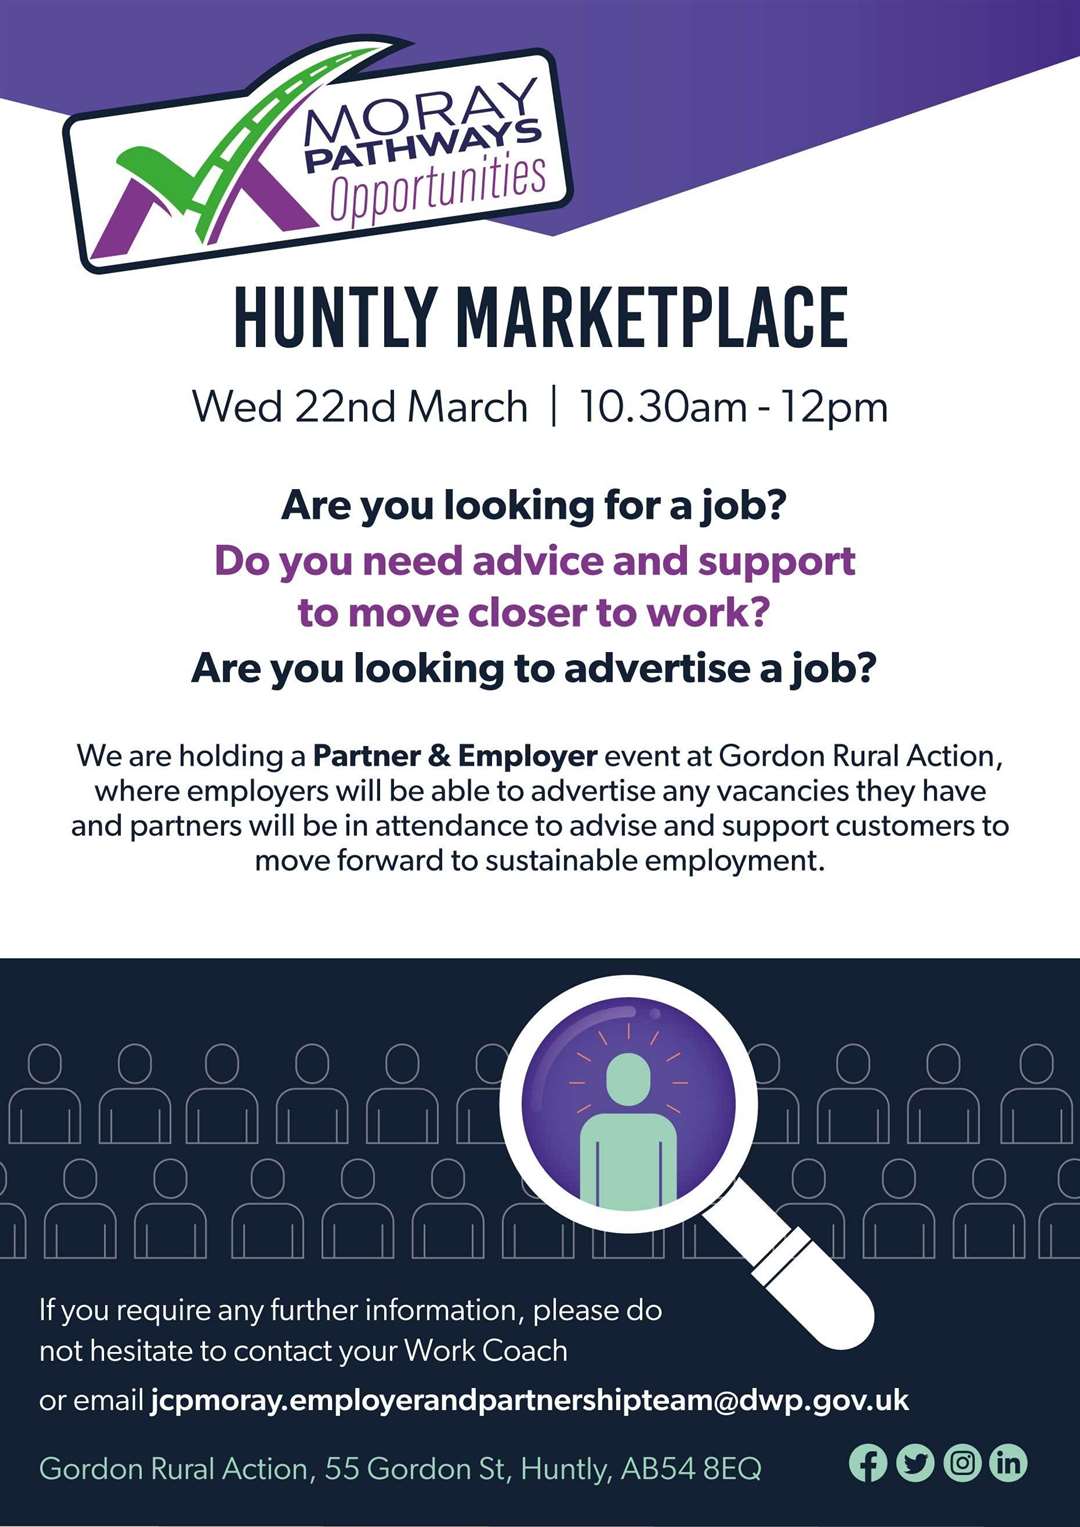 The Huntly Marketplace is due to take place on March 22.